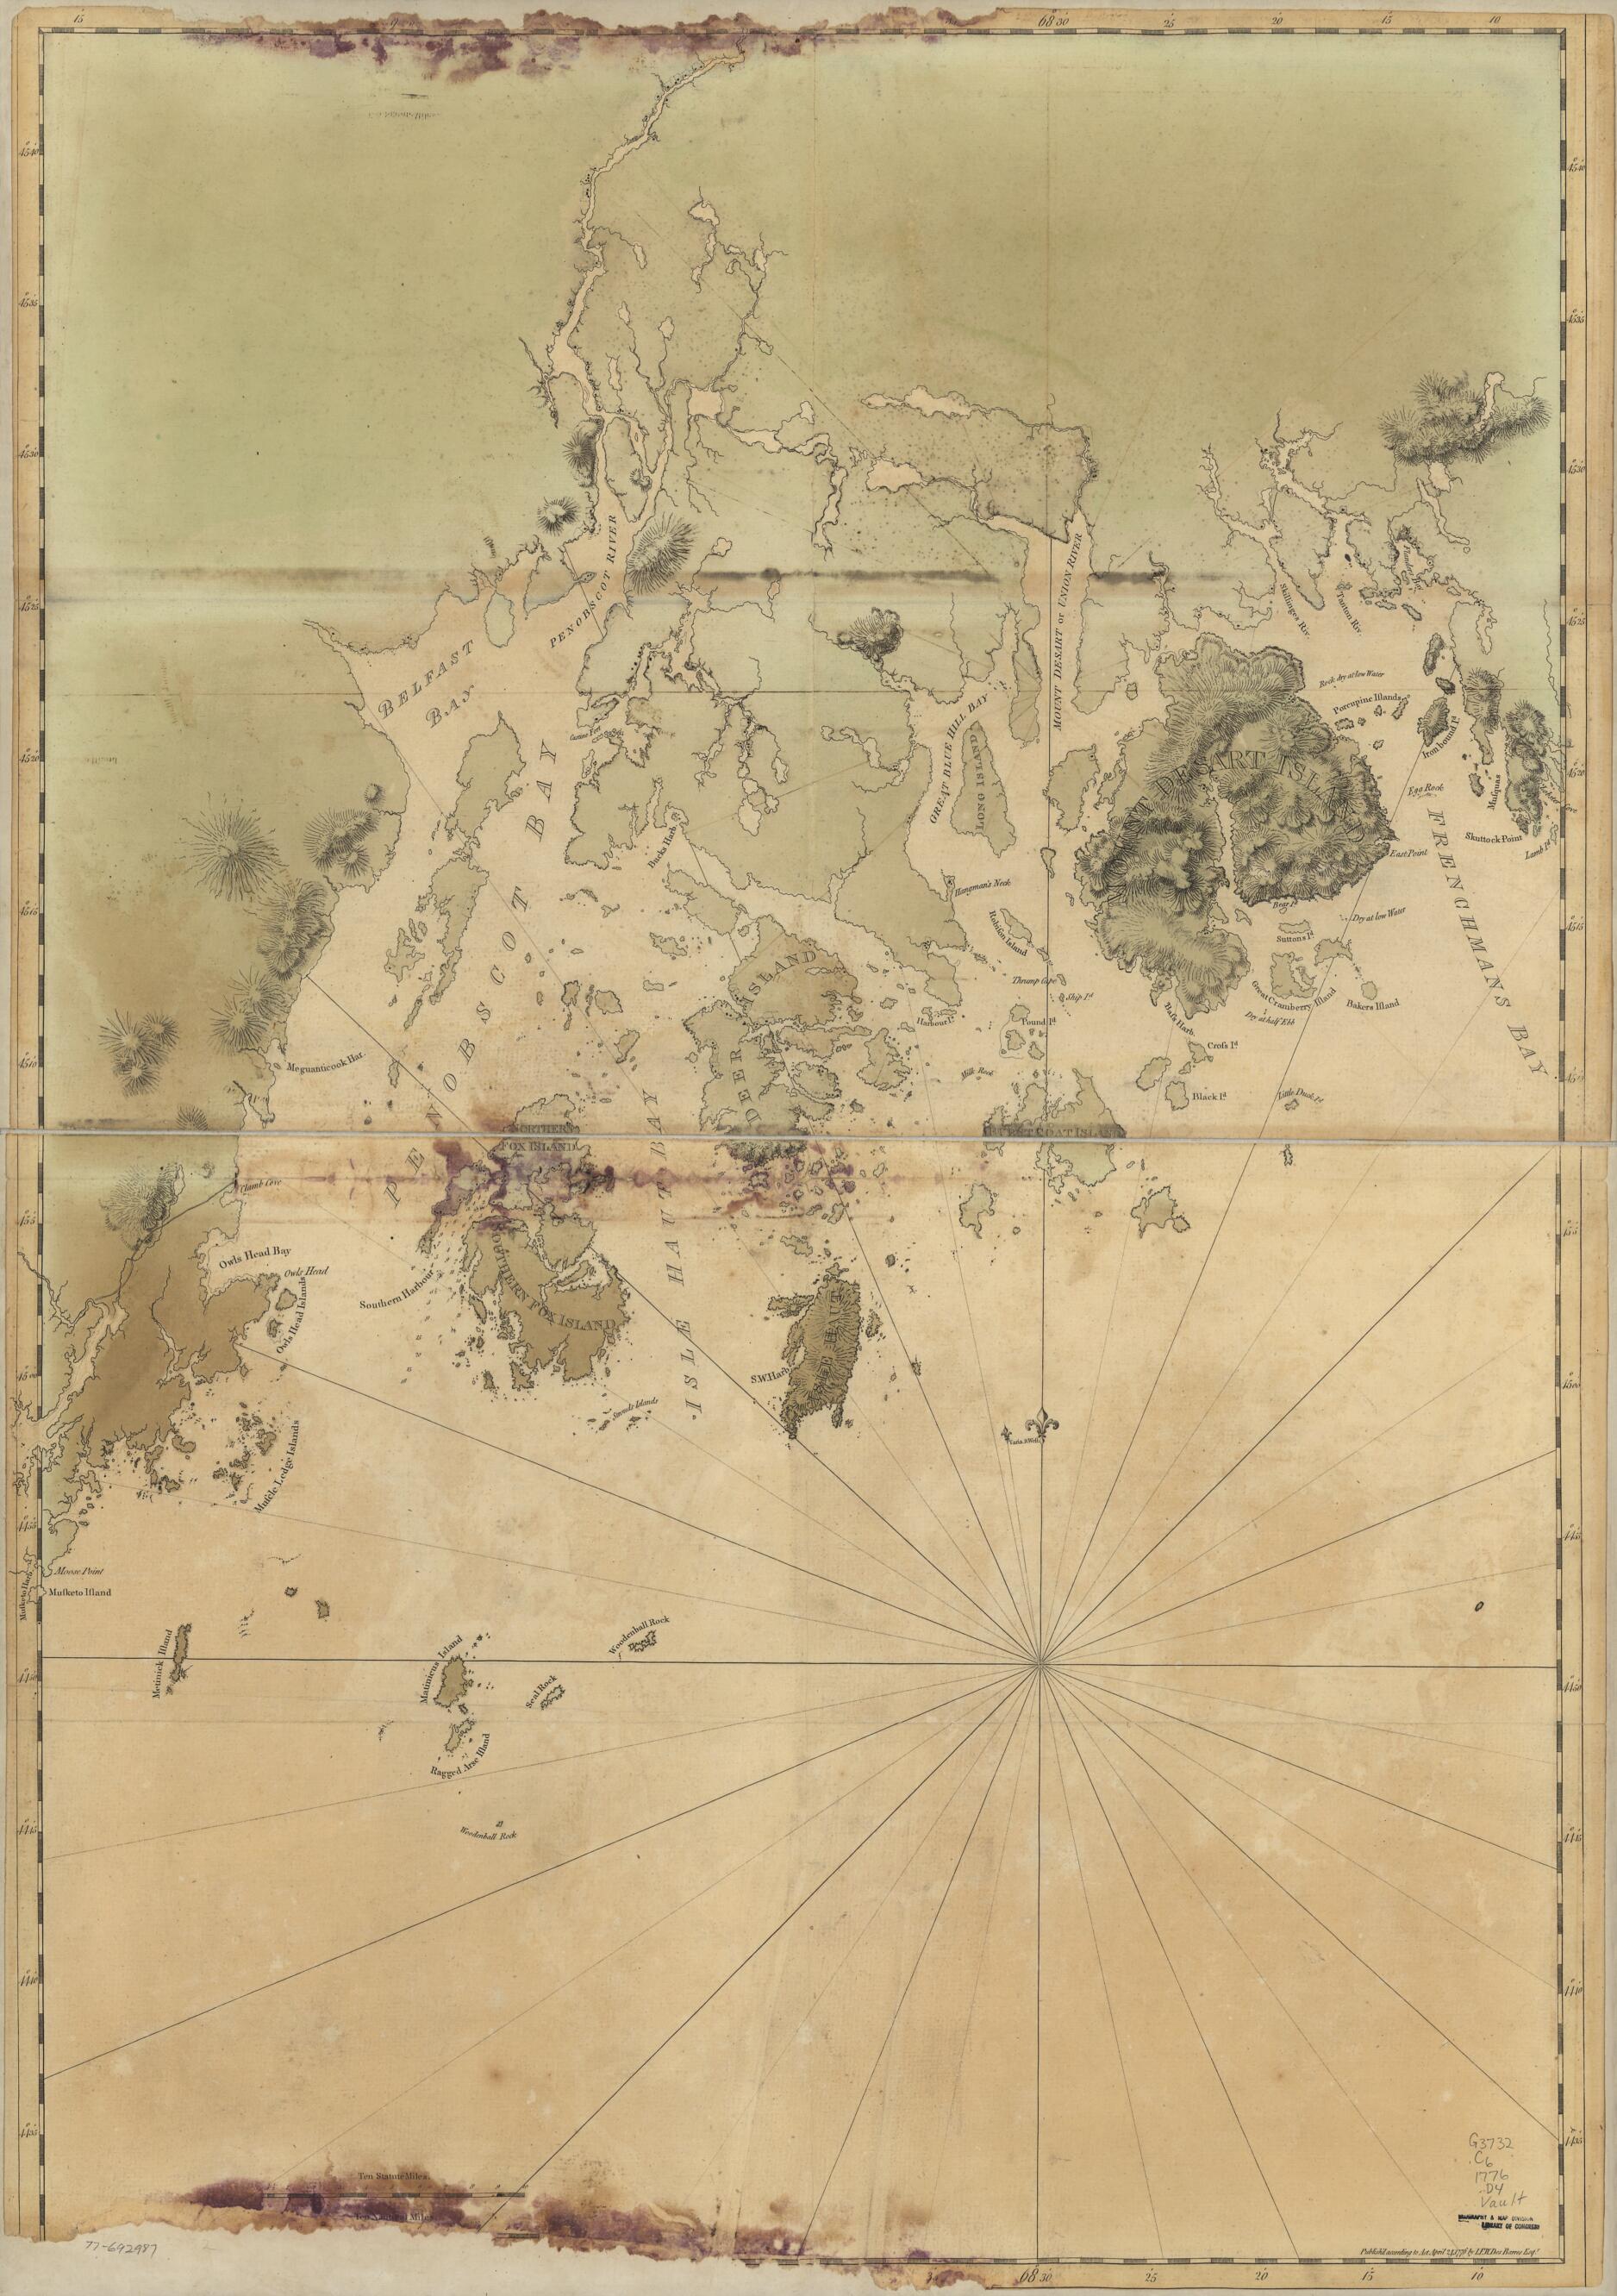 This old map of Coast of Maine from Frenchman Bay to Mosquito Harbor from 1776 was created by Joseph F. W. (Joseph Frederick Wallet) Des Barres in 1776